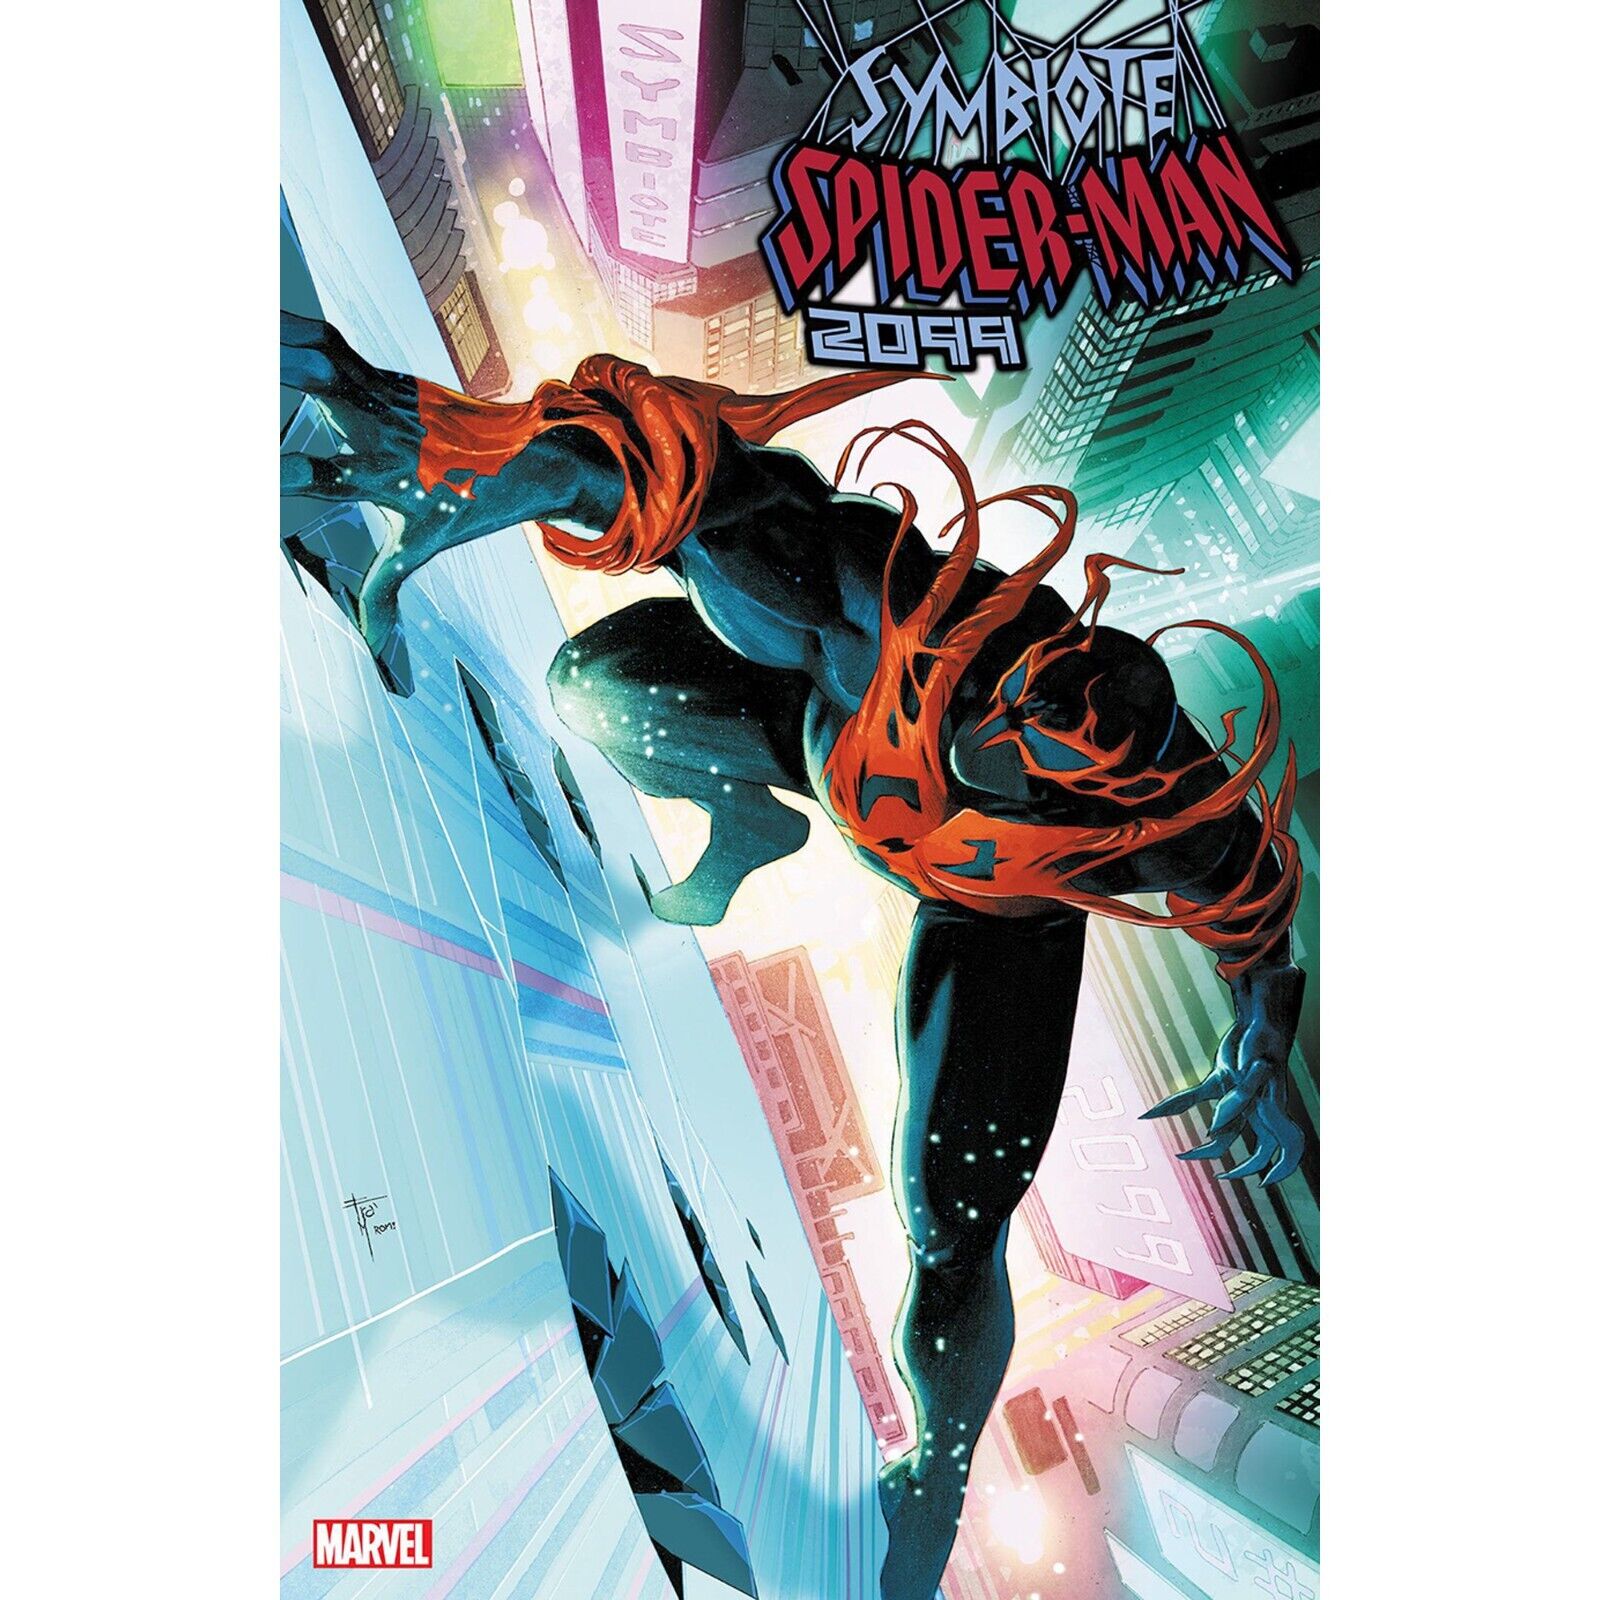 Symbiote Spider-Man 2099 (2024) #1 2 3 4 5 Marvel Comics COVER SELECT